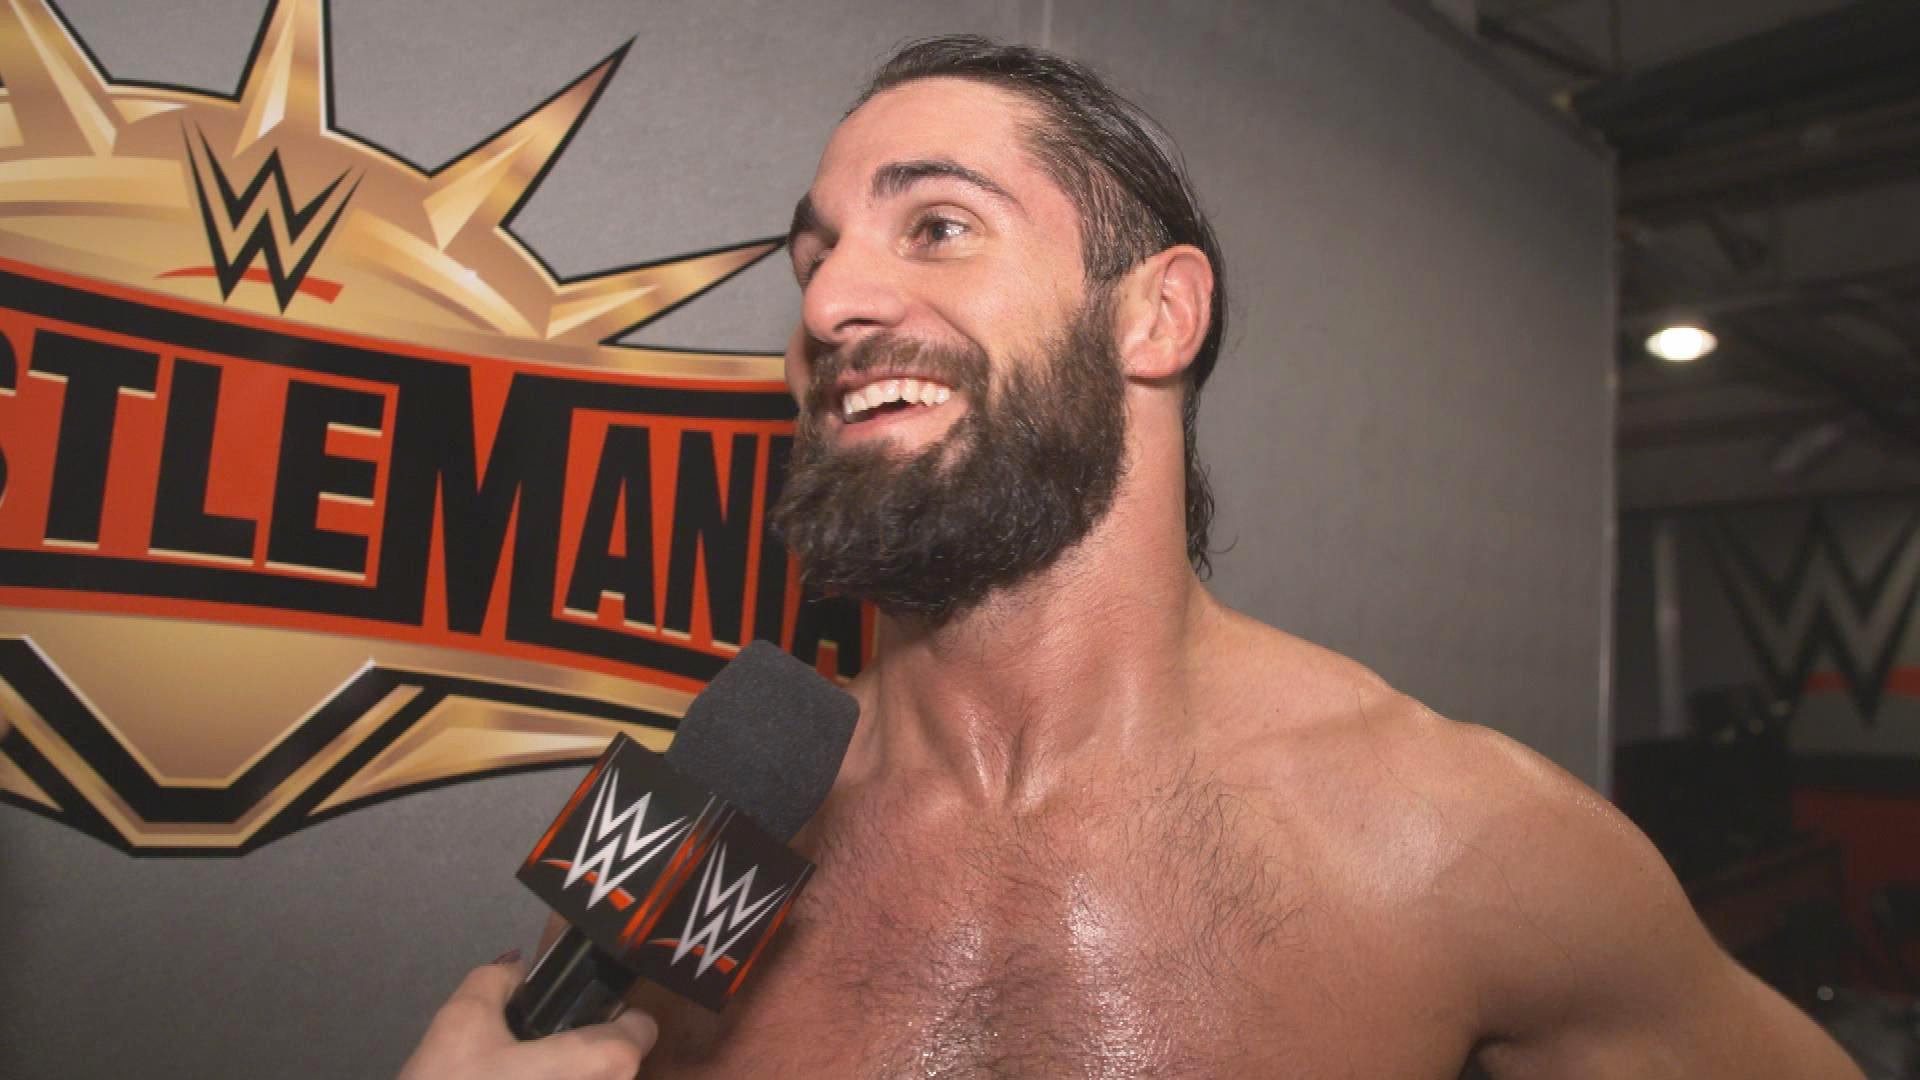 Seth Rollins considers his WrestleMania opponent options: WWE.com